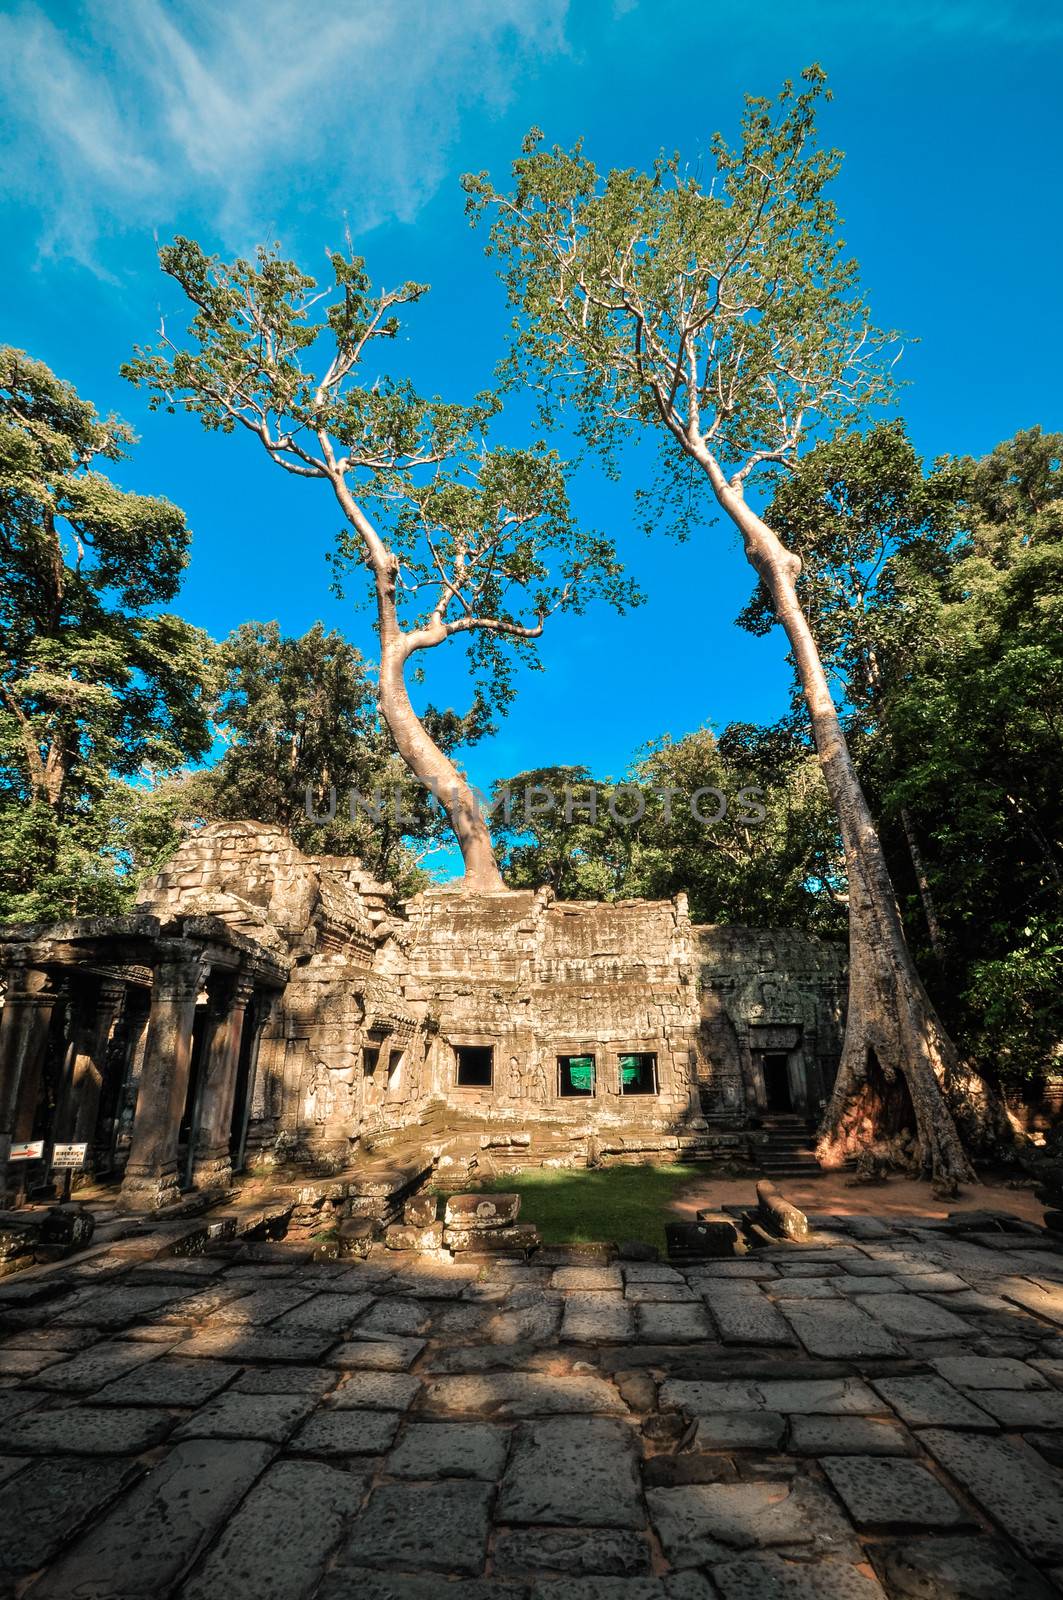 Giant tree covering Ta Prom and Angkor Wat temple, Siem Reap, Cambodia Asia